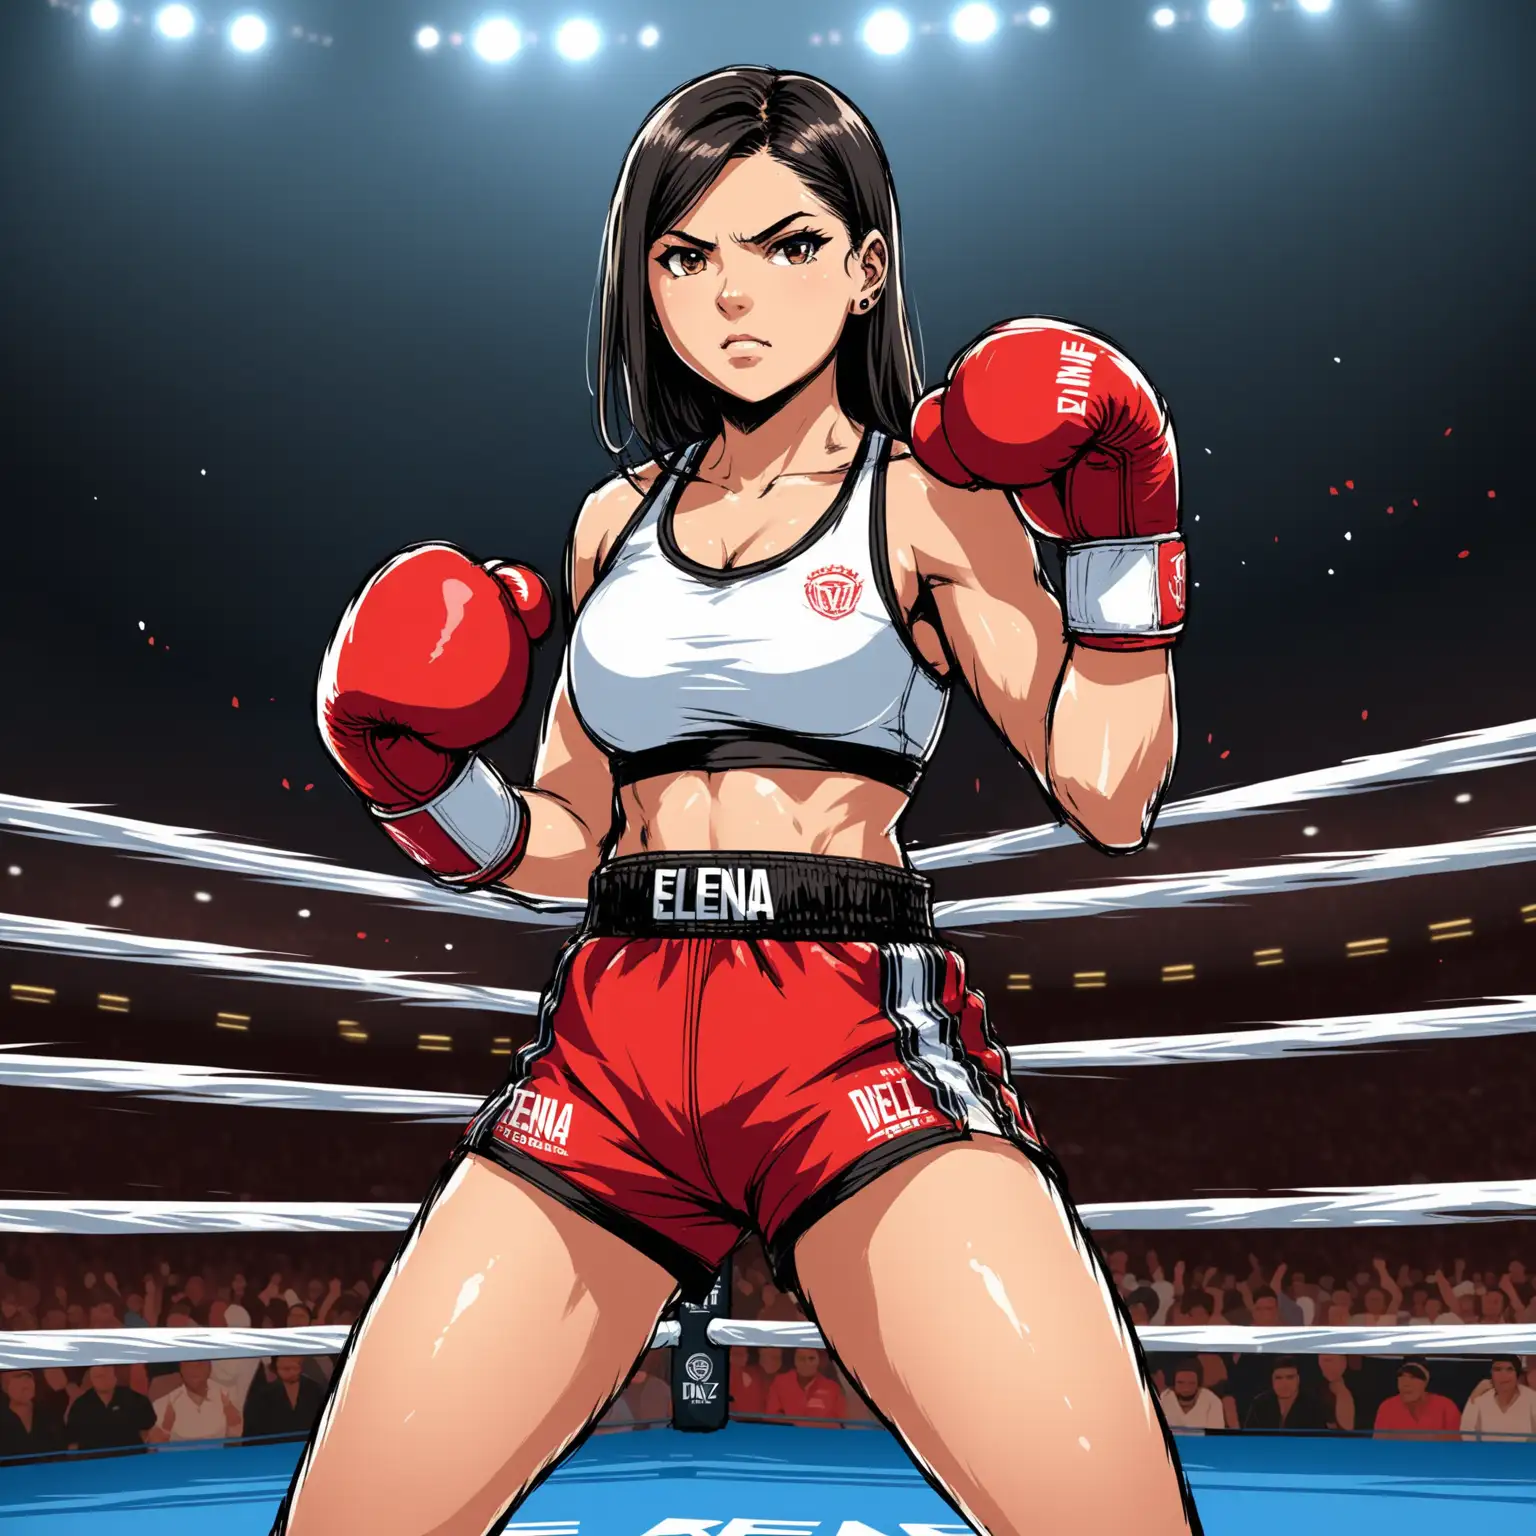 Elena Diaz The Strategist Boxing Match Tactical Genius in Red and Black Attire